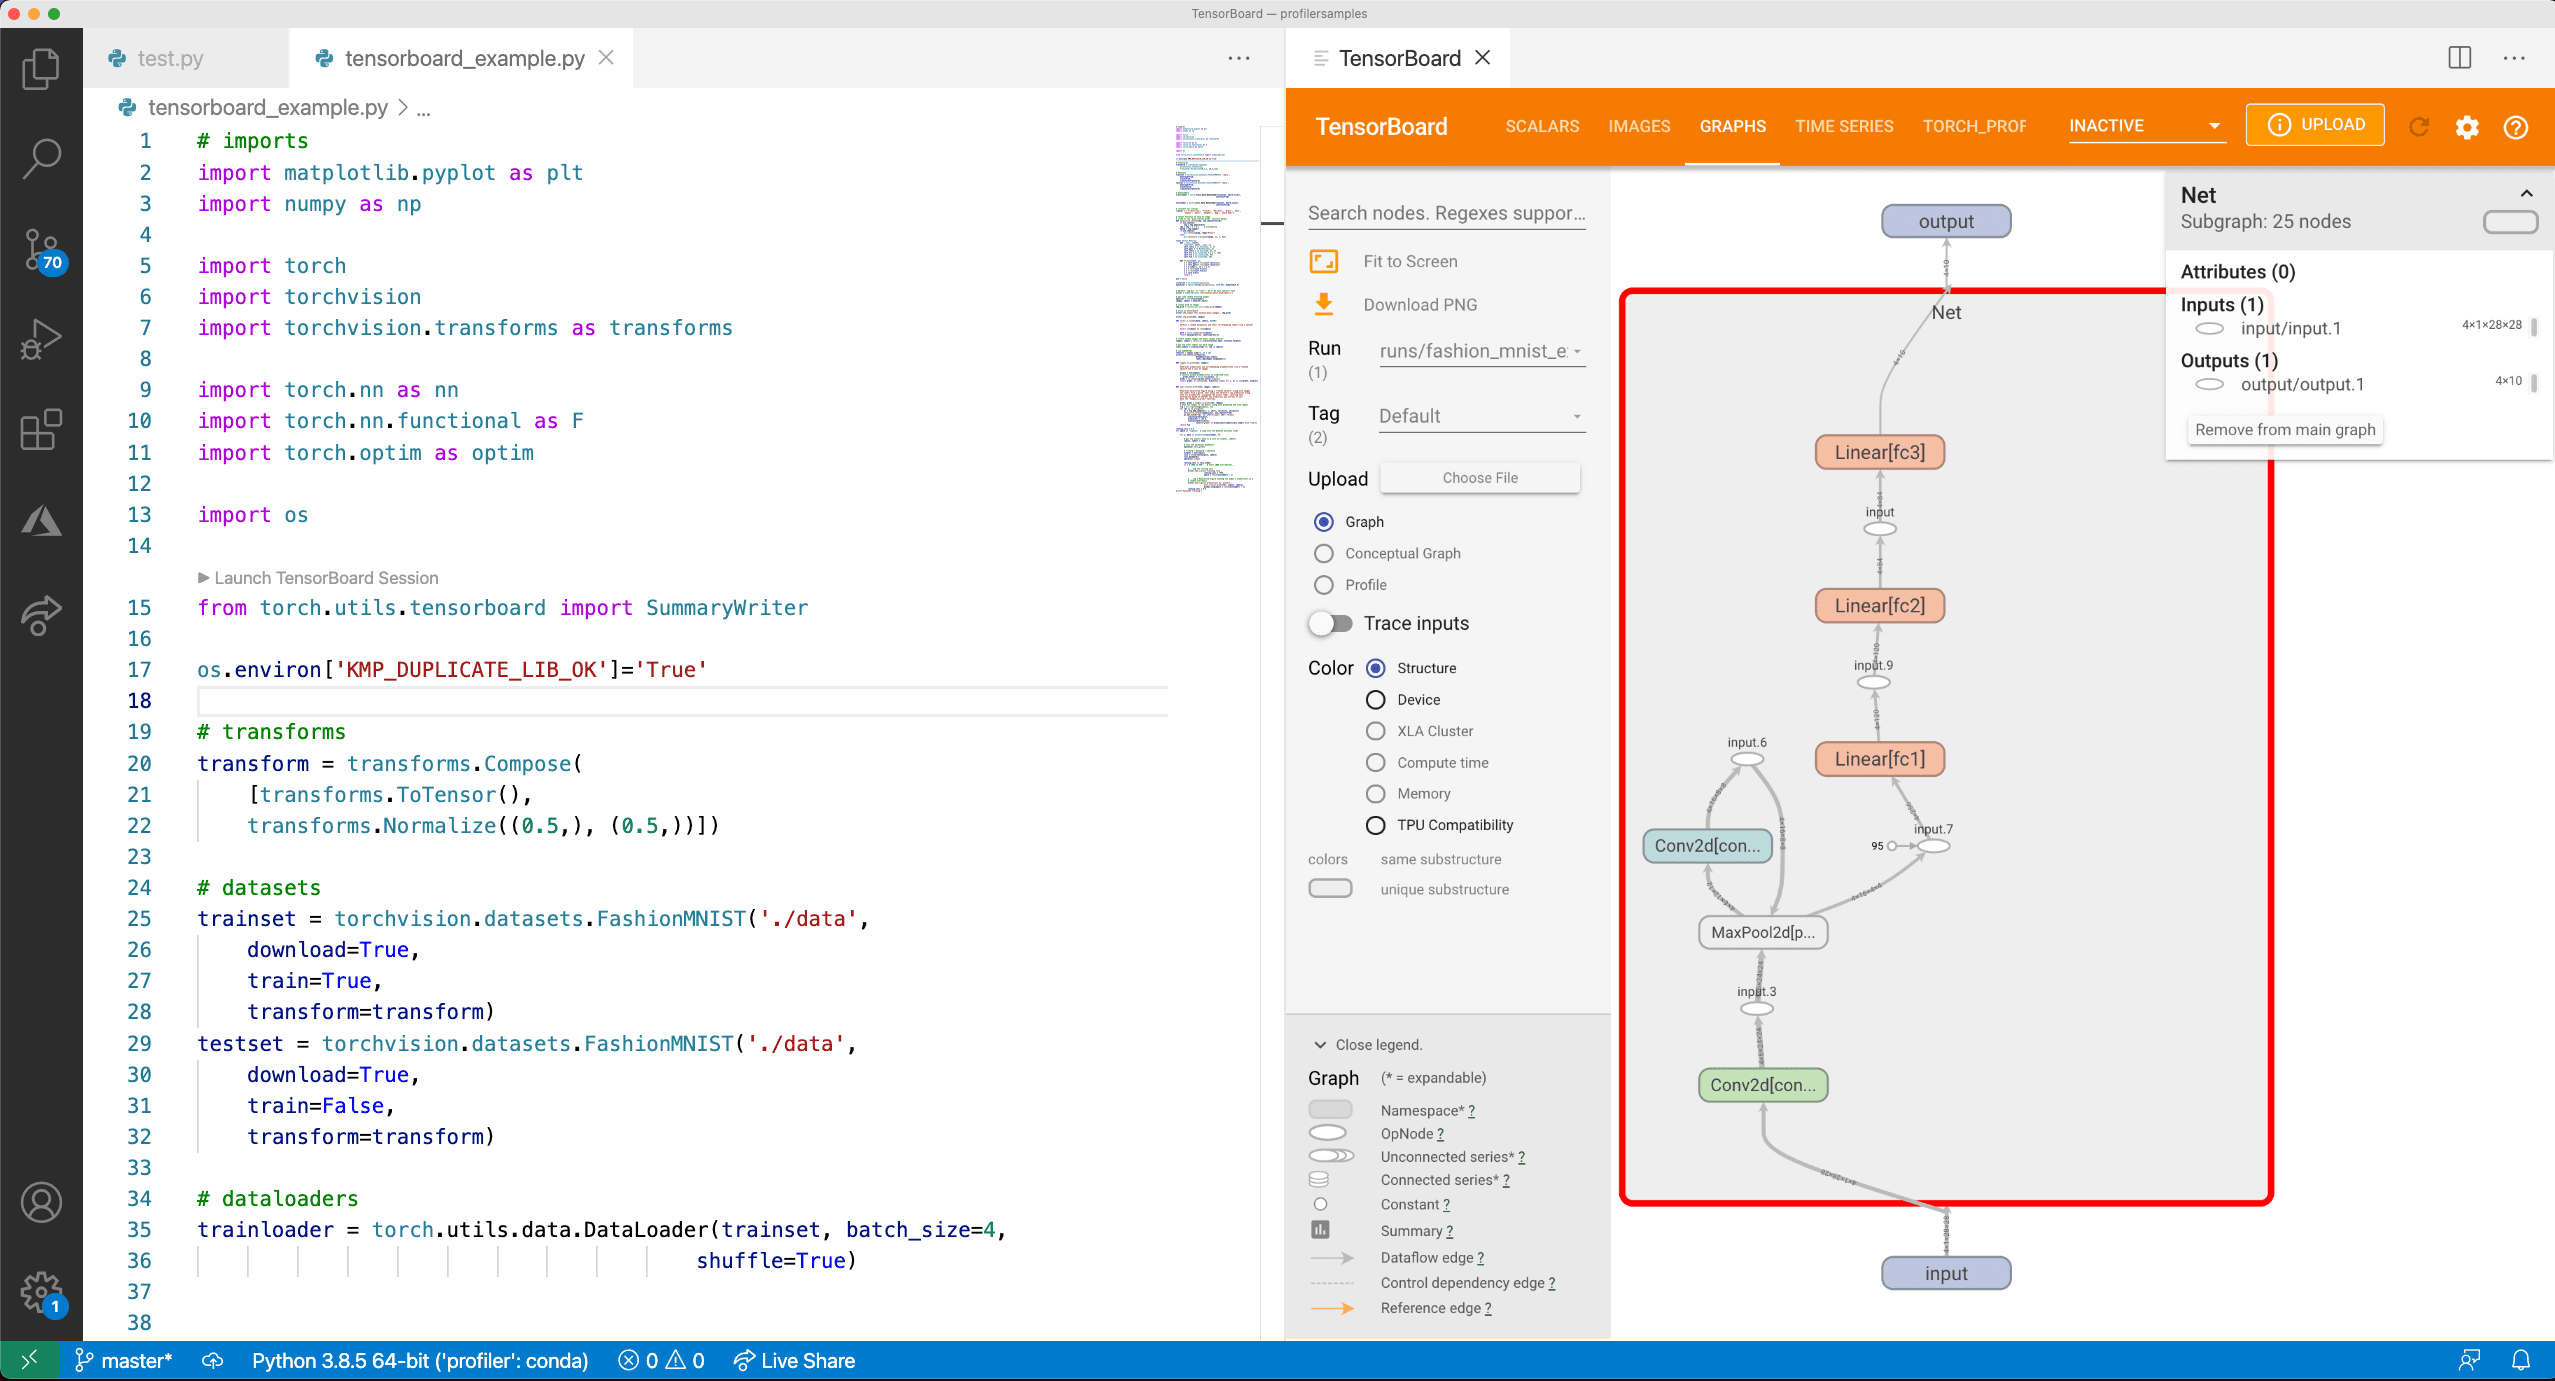 TensorBoard integration with VS Code